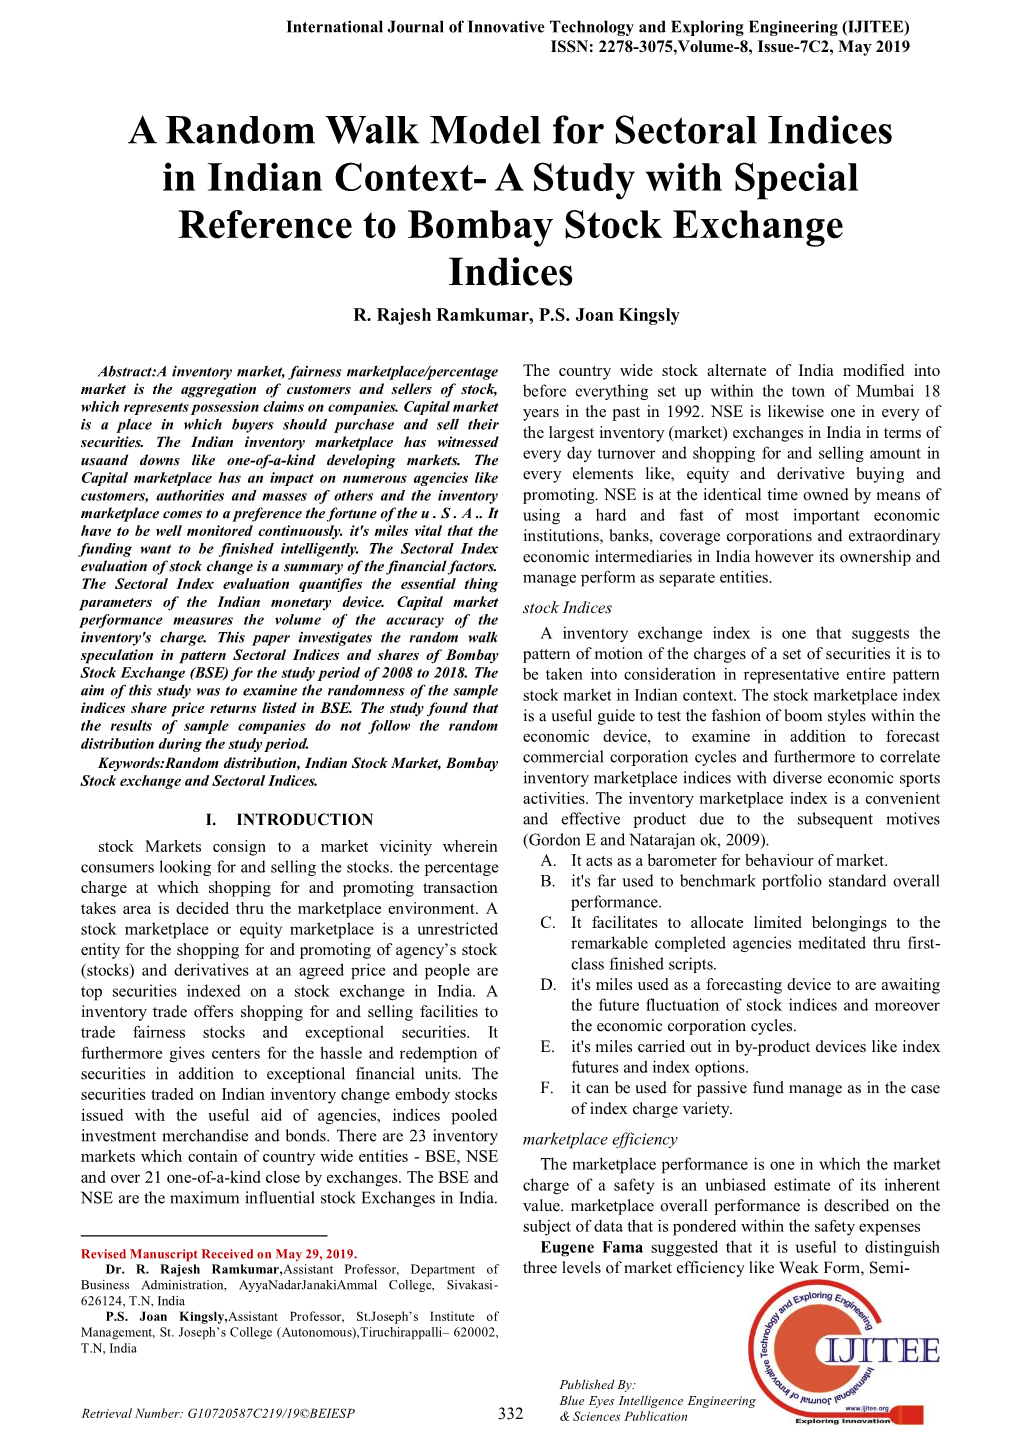 A Random Walk Model for Sectoral Indices in Indian Context- a Study with Special Reference to Bombay Stock Exchange Indices R